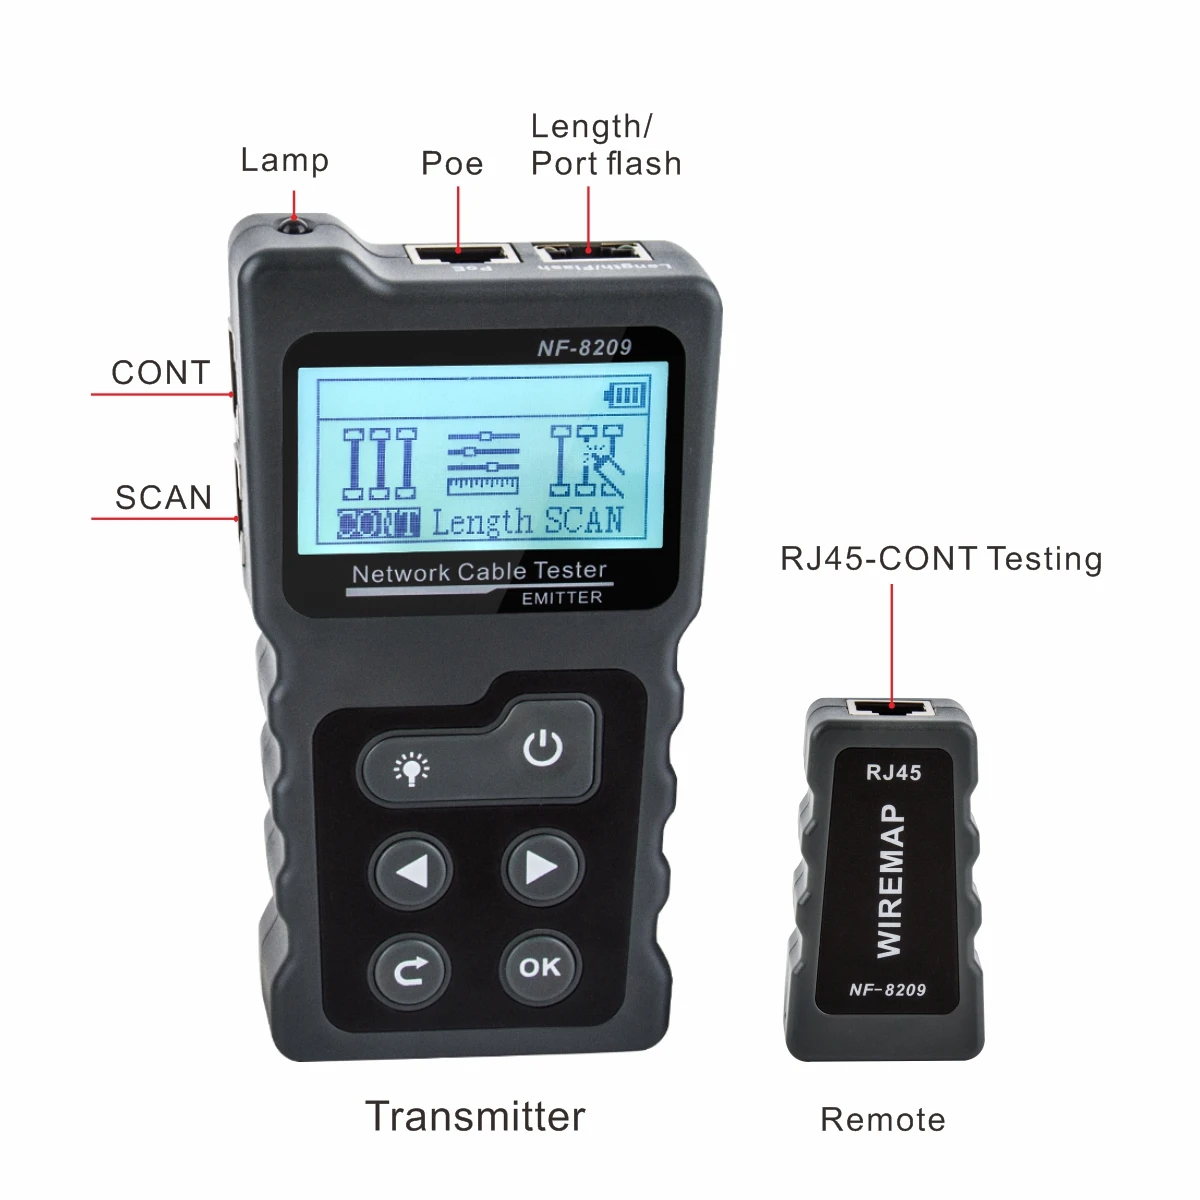 NOYAFA NF-488/NF-8209 POE Wire Checker RJ45 Cable Tracker LCD Display Measure Length Cat5 Cat6 Test Network Tool Lan Tester 4